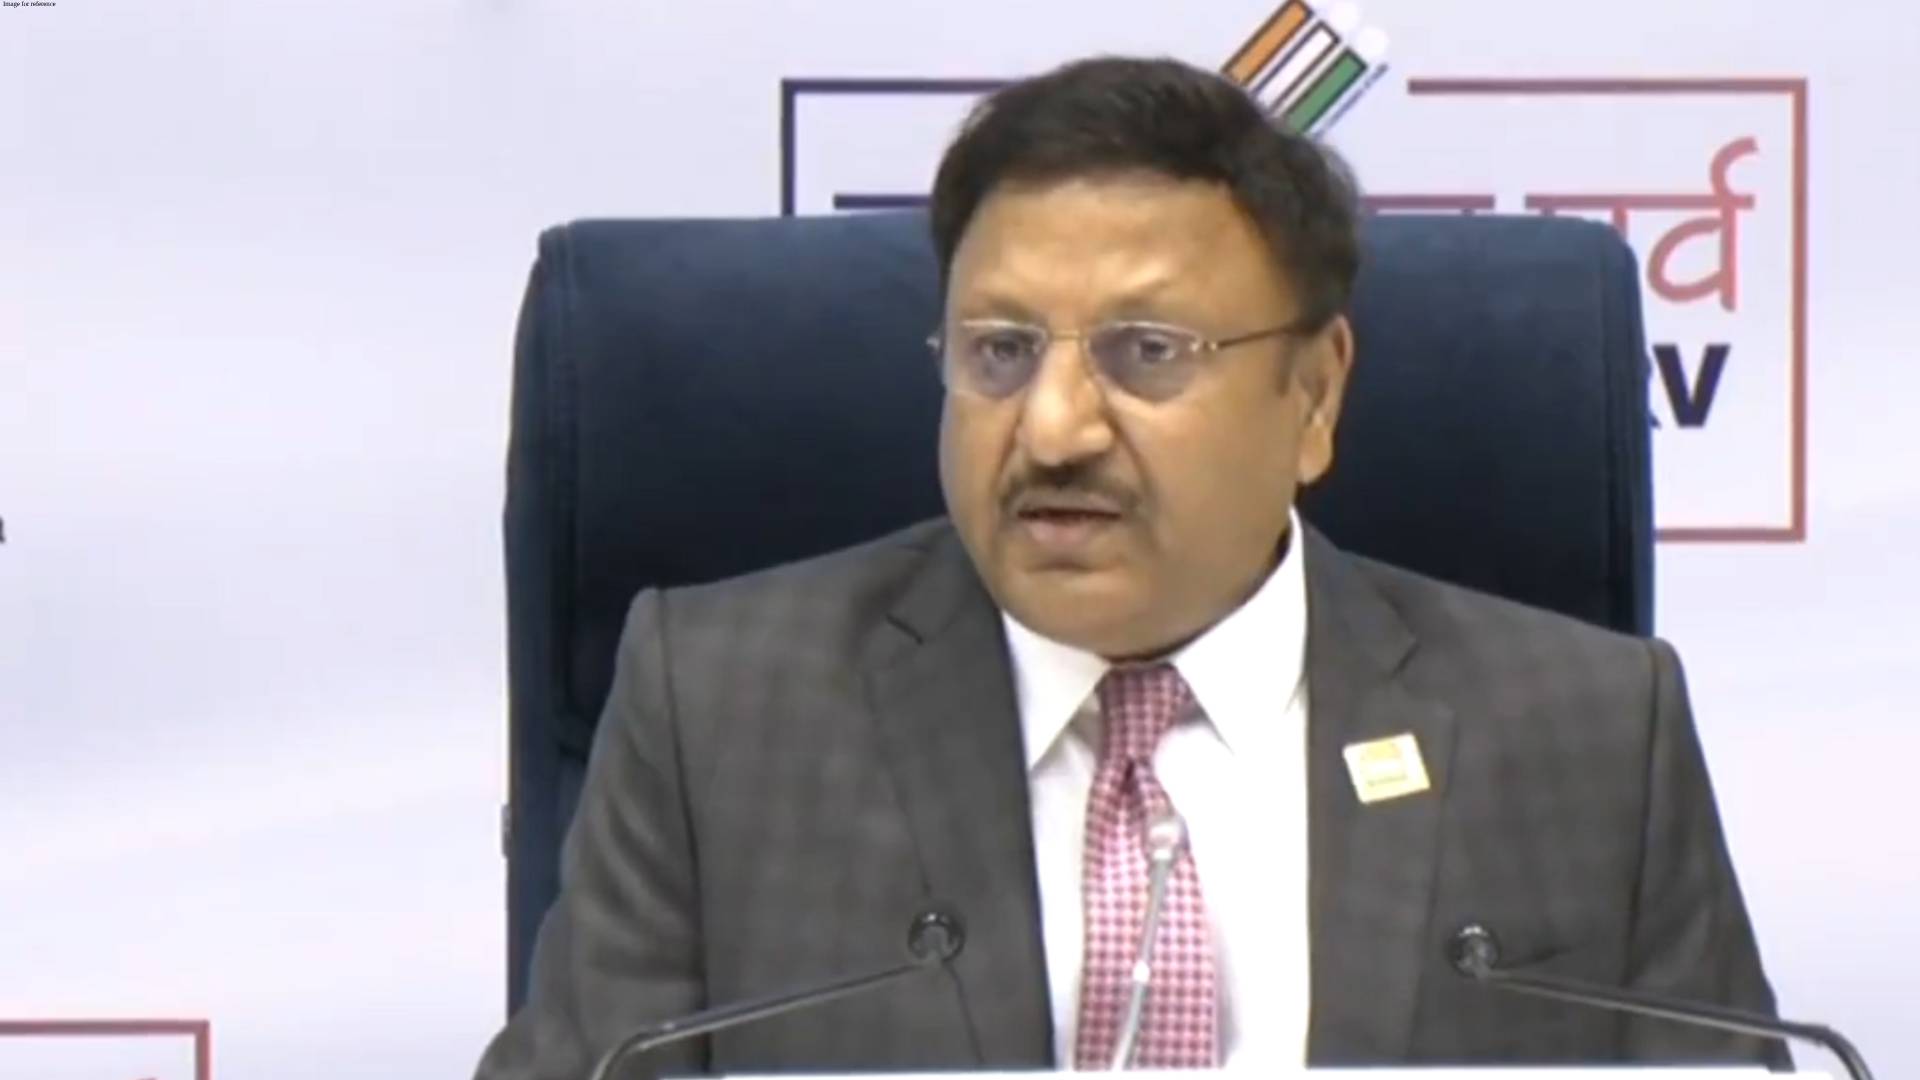 Over 97 crore eligible to vote in LS elections, urge voters to get inked: CEC Rajiv Kumar